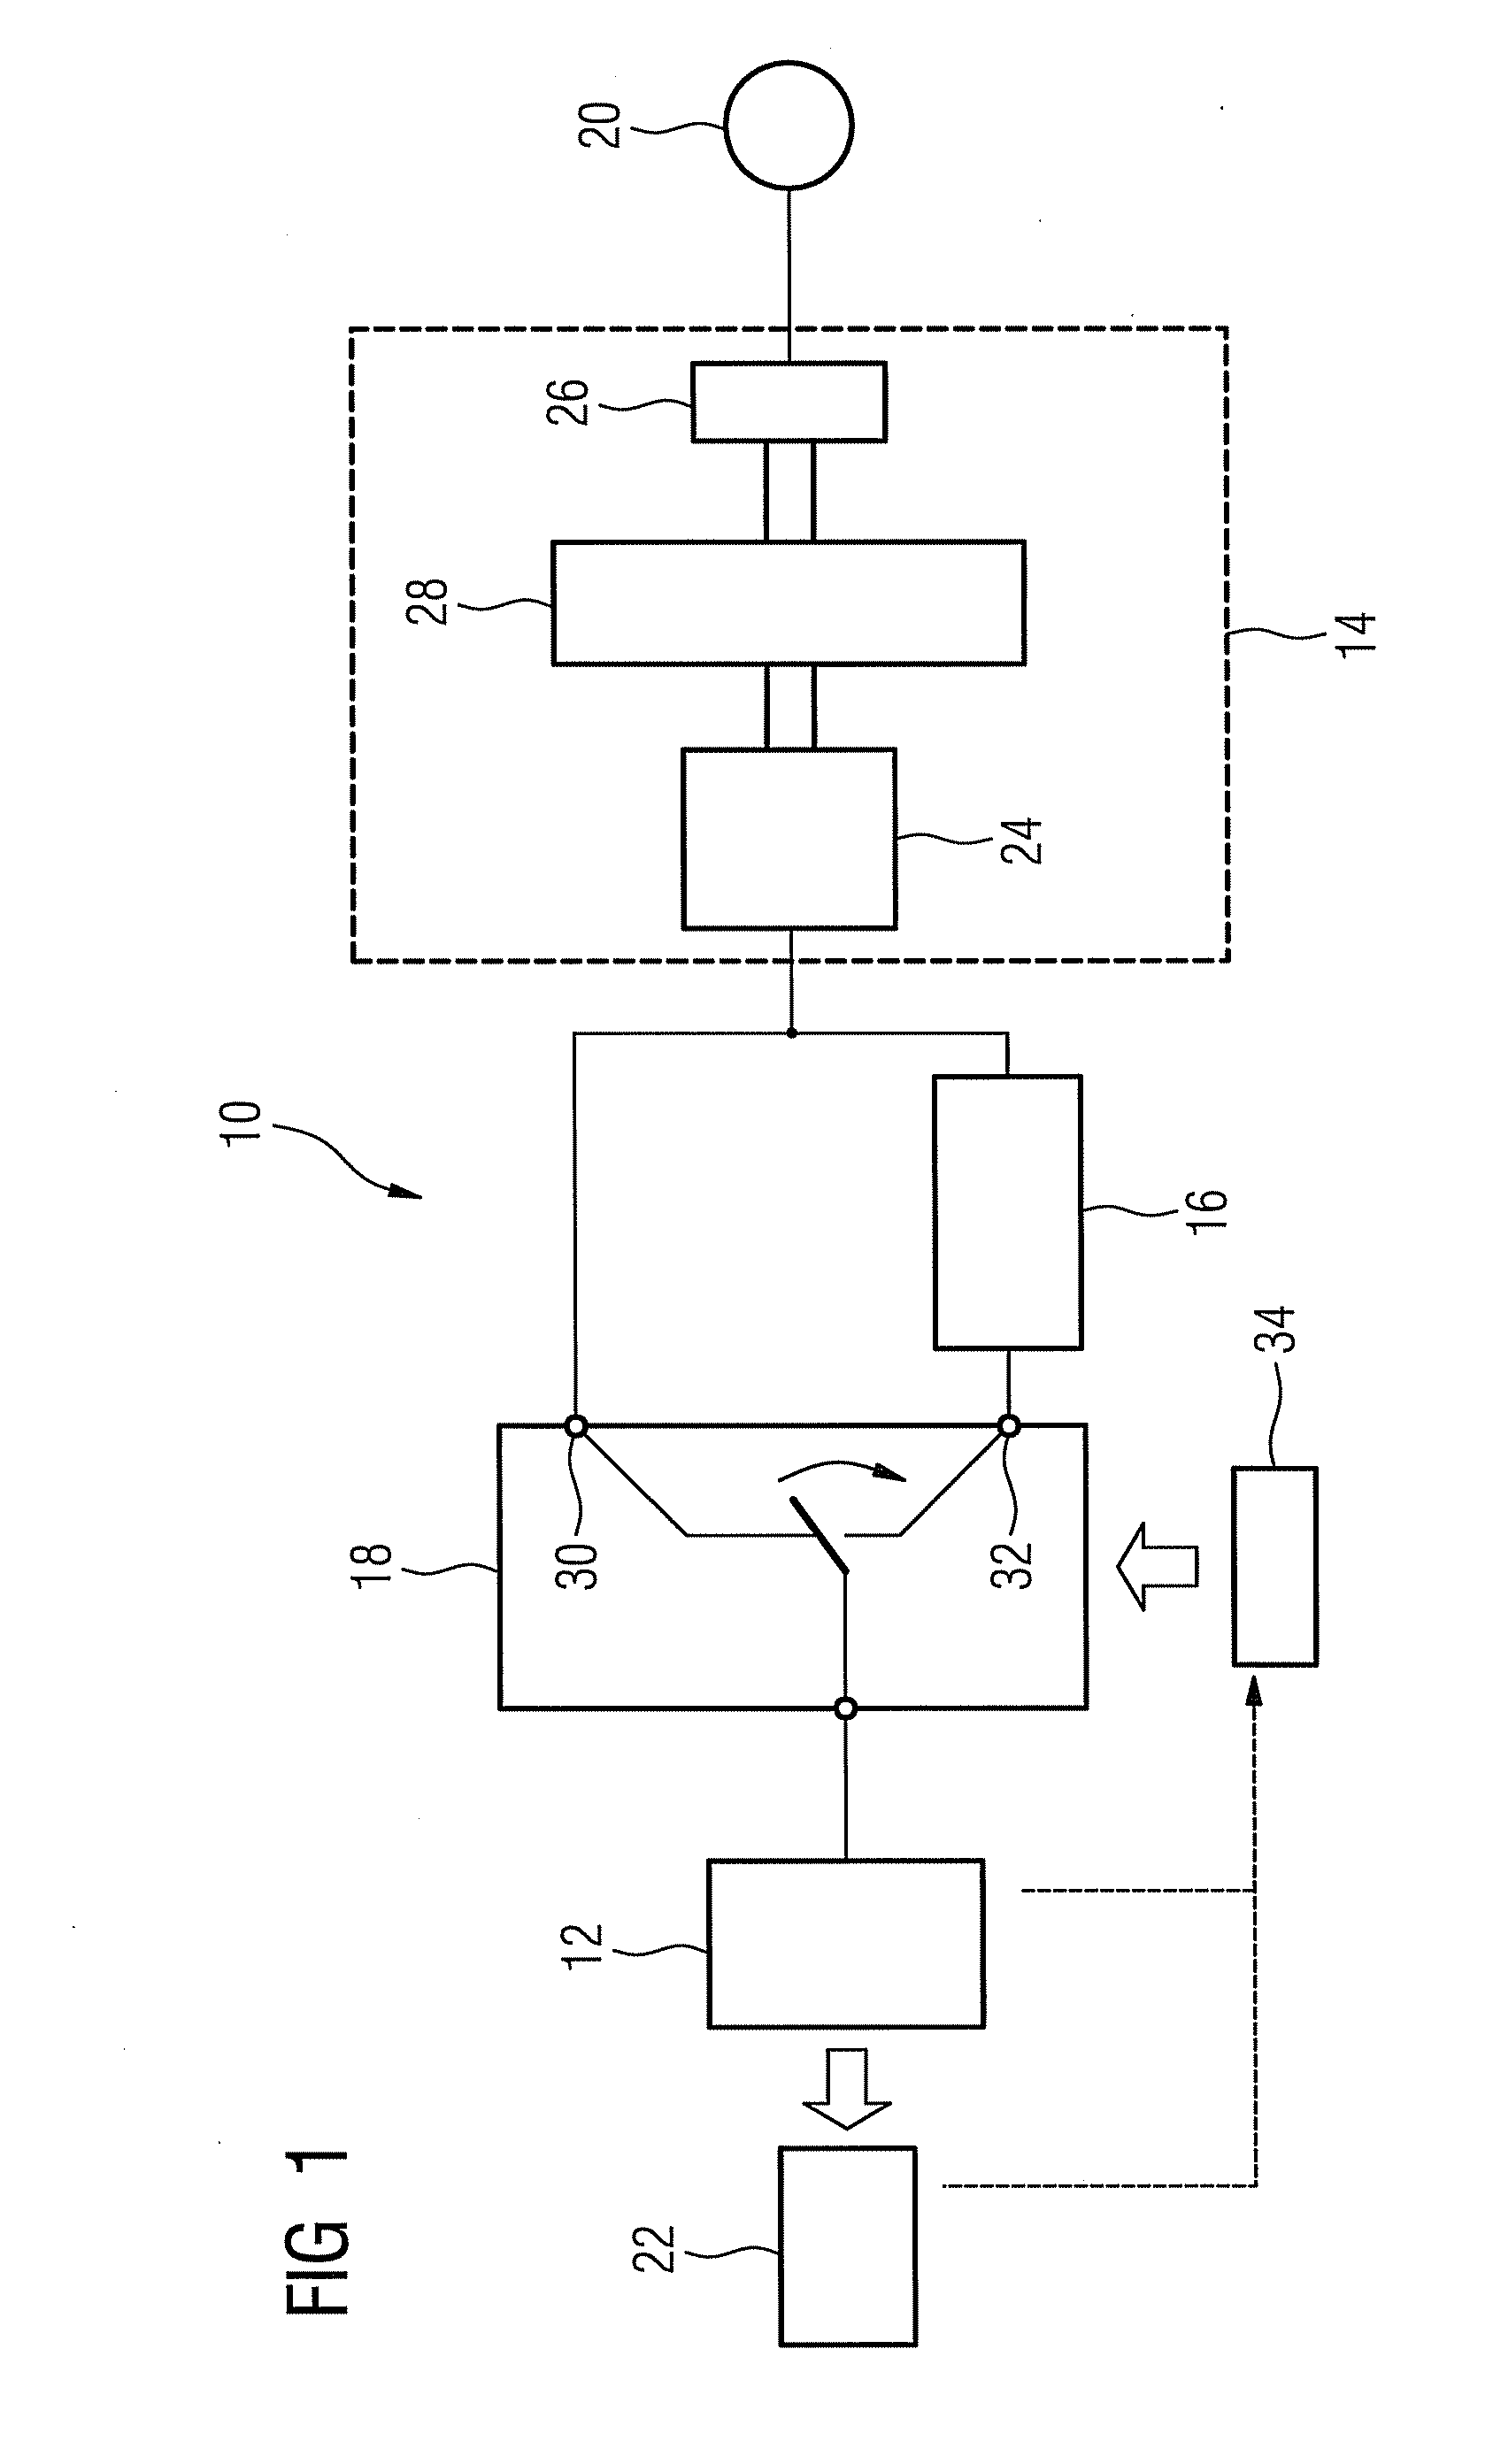 Drive Apparatus and Method for Its Operation